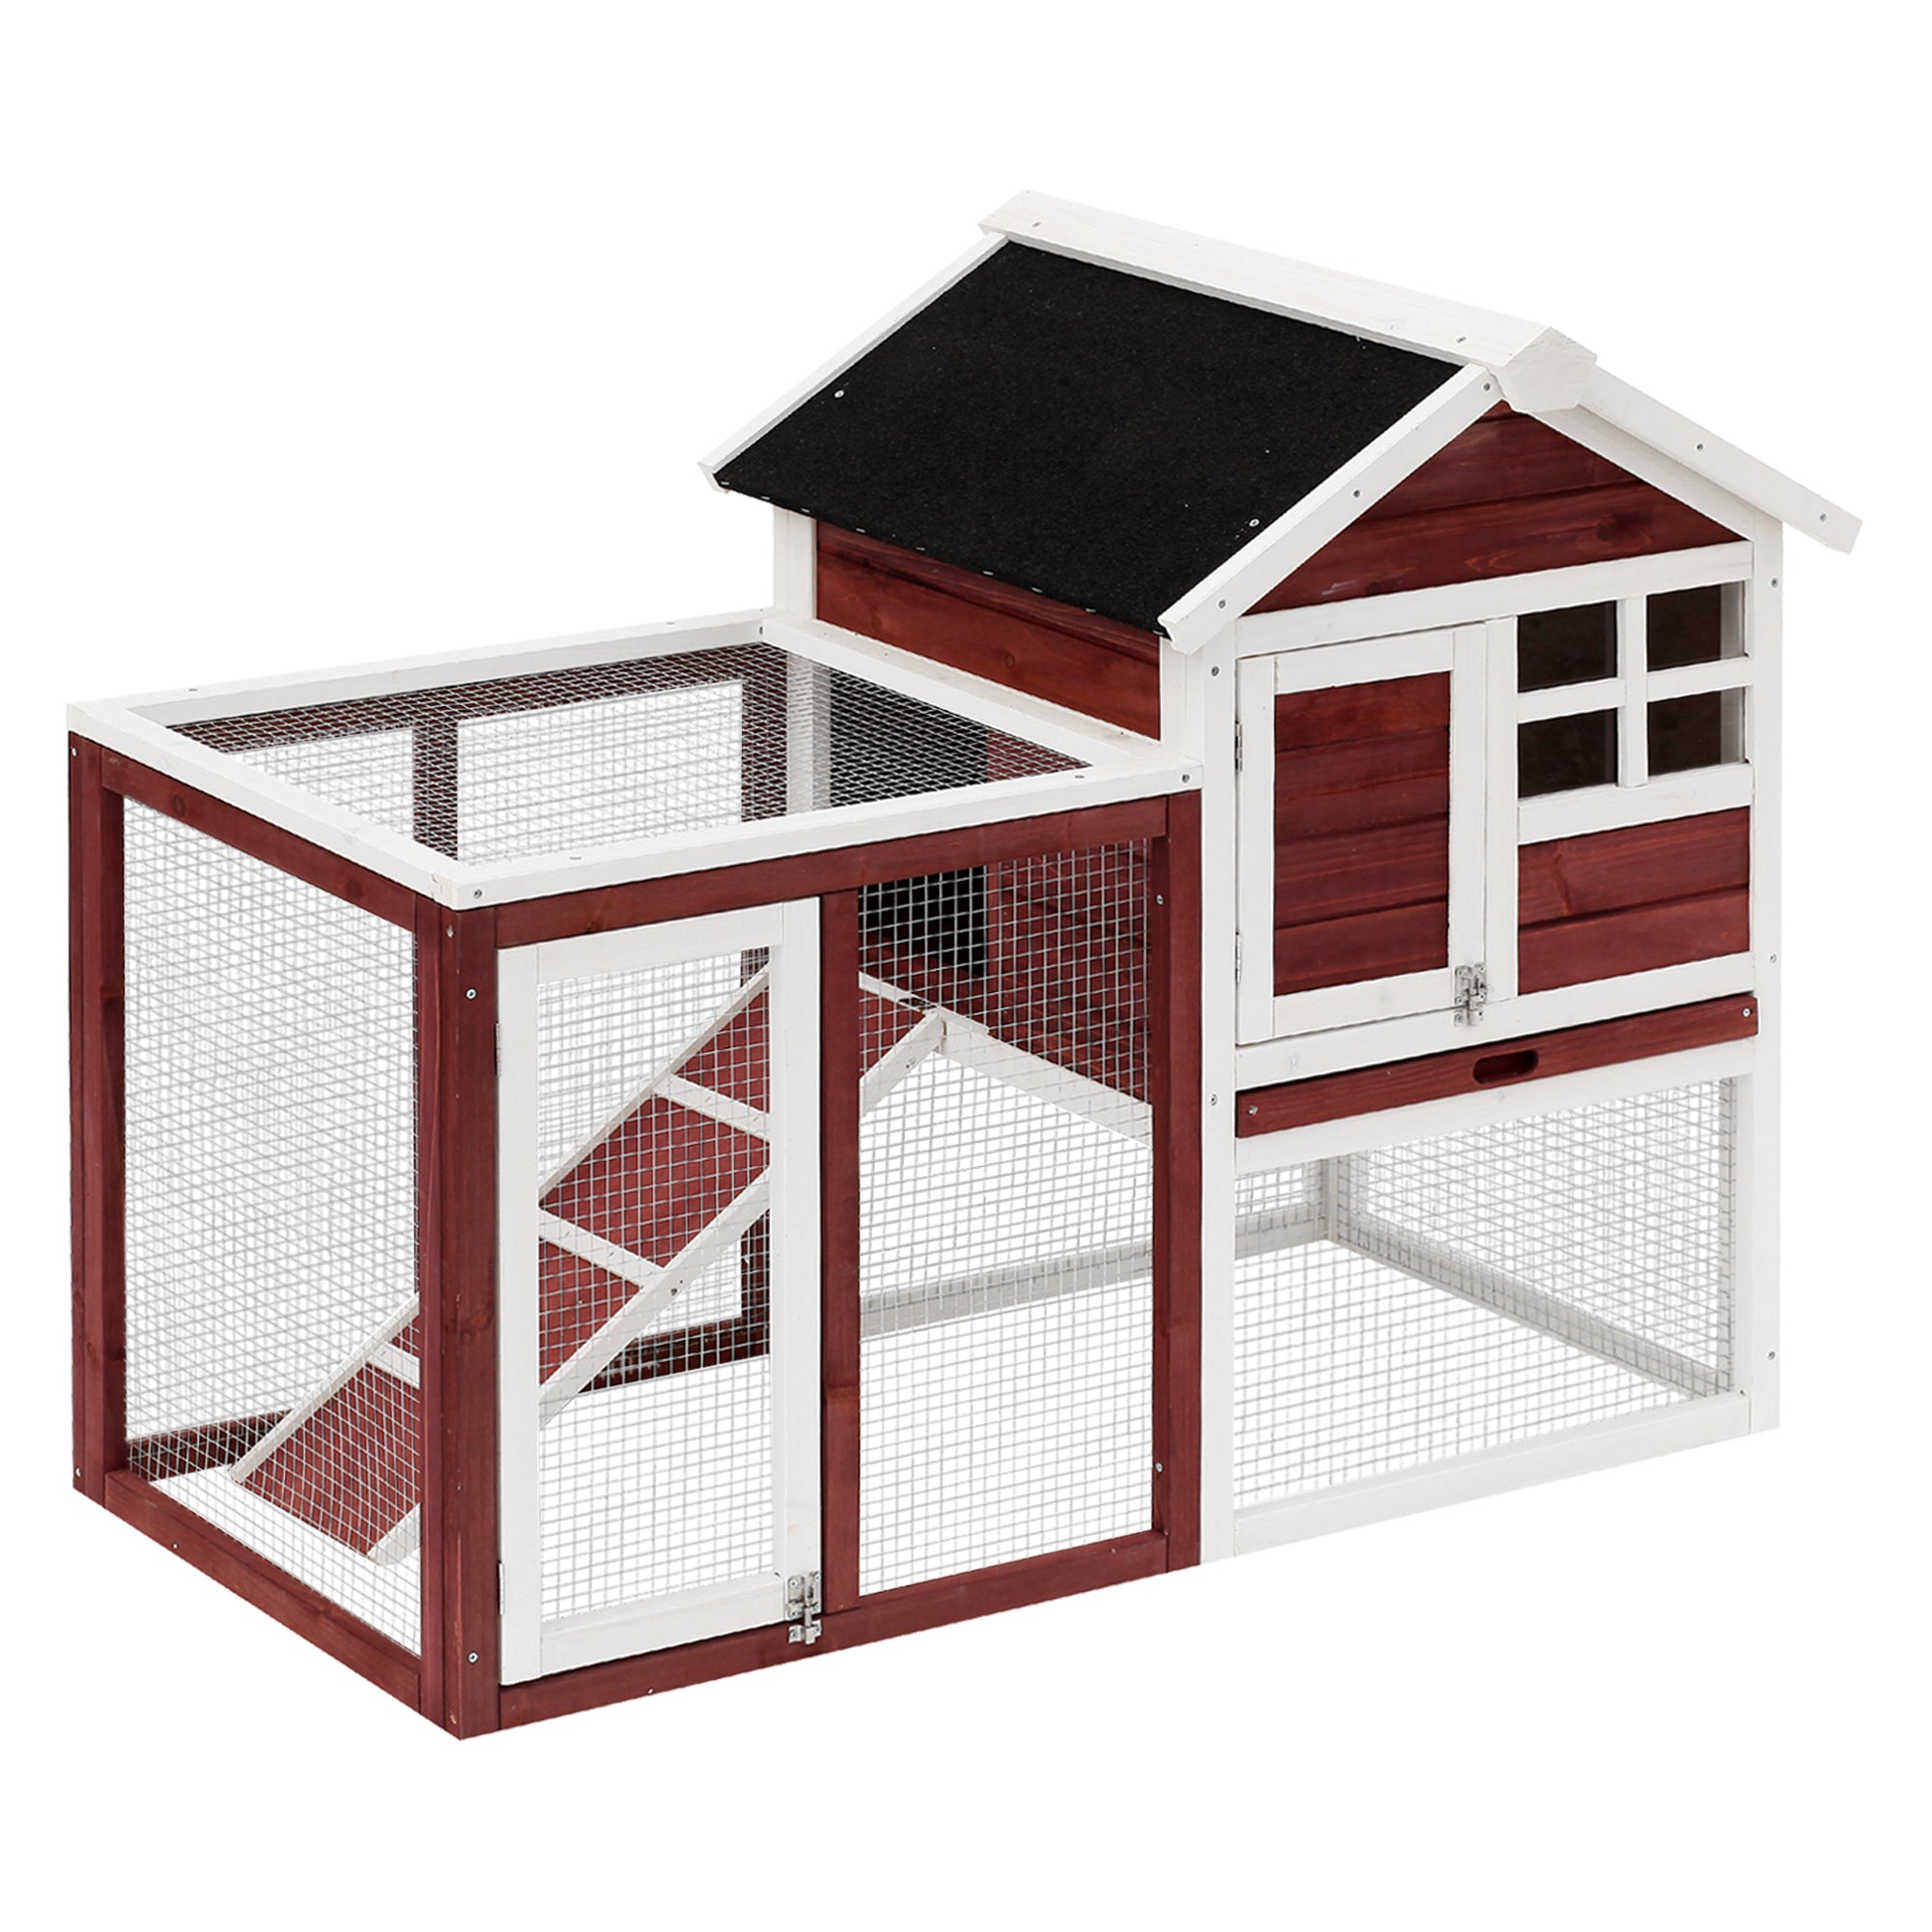 2 Tiers Rabbit Hutch and Run Wooden Guinea Pig Hutch Outdoor with Sliding Tray, Ramp, 122 x 62.6 x 92cm, PawHut, Brown